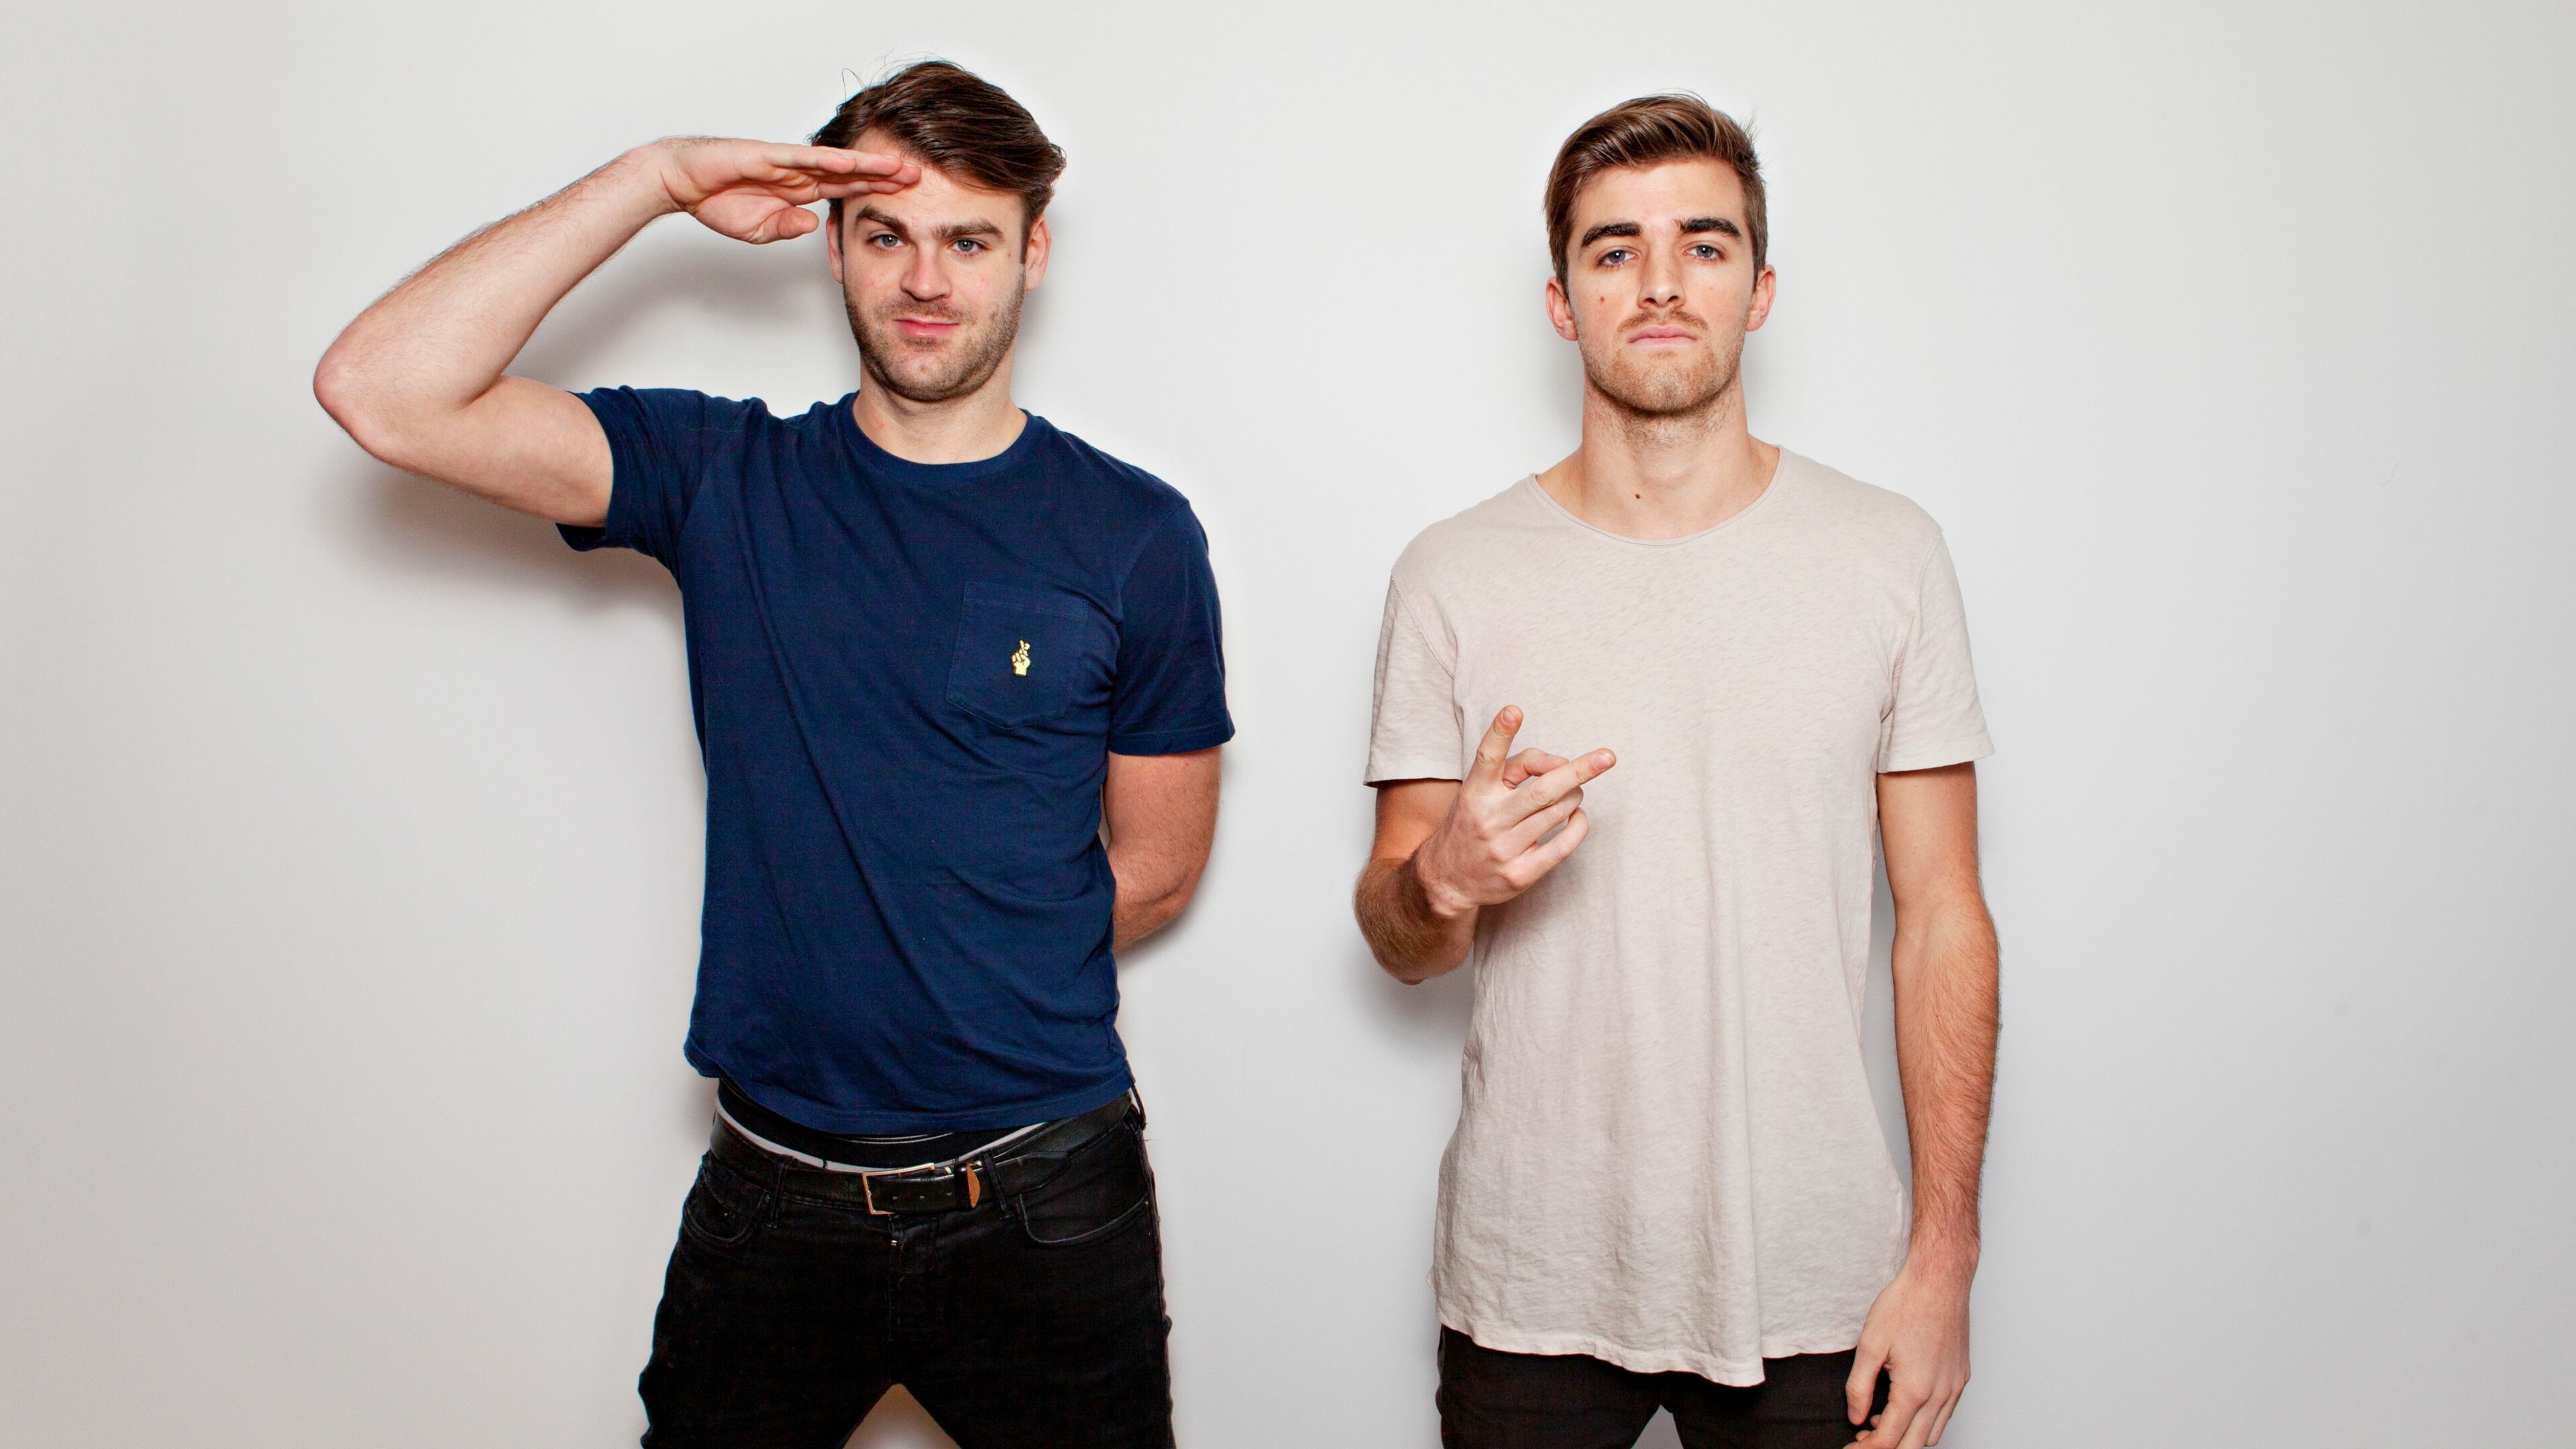 The Chainsmokers, Creative wallpapers, Unique artistry, Visual interest, 3840x2160 4K Desktop